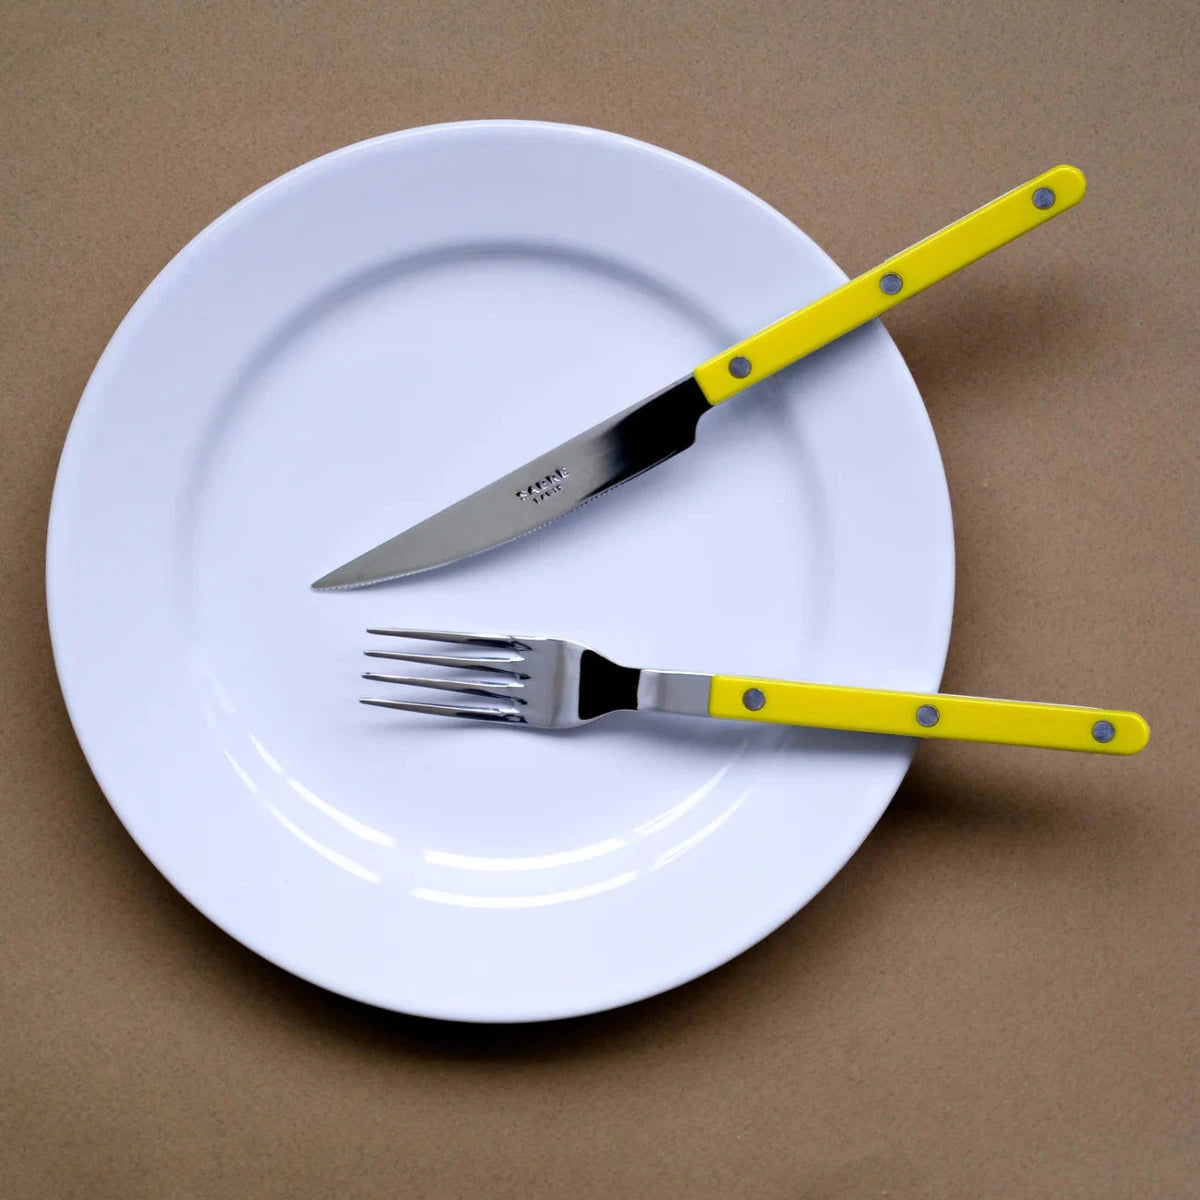 Bistrot Cutlery // Yellow